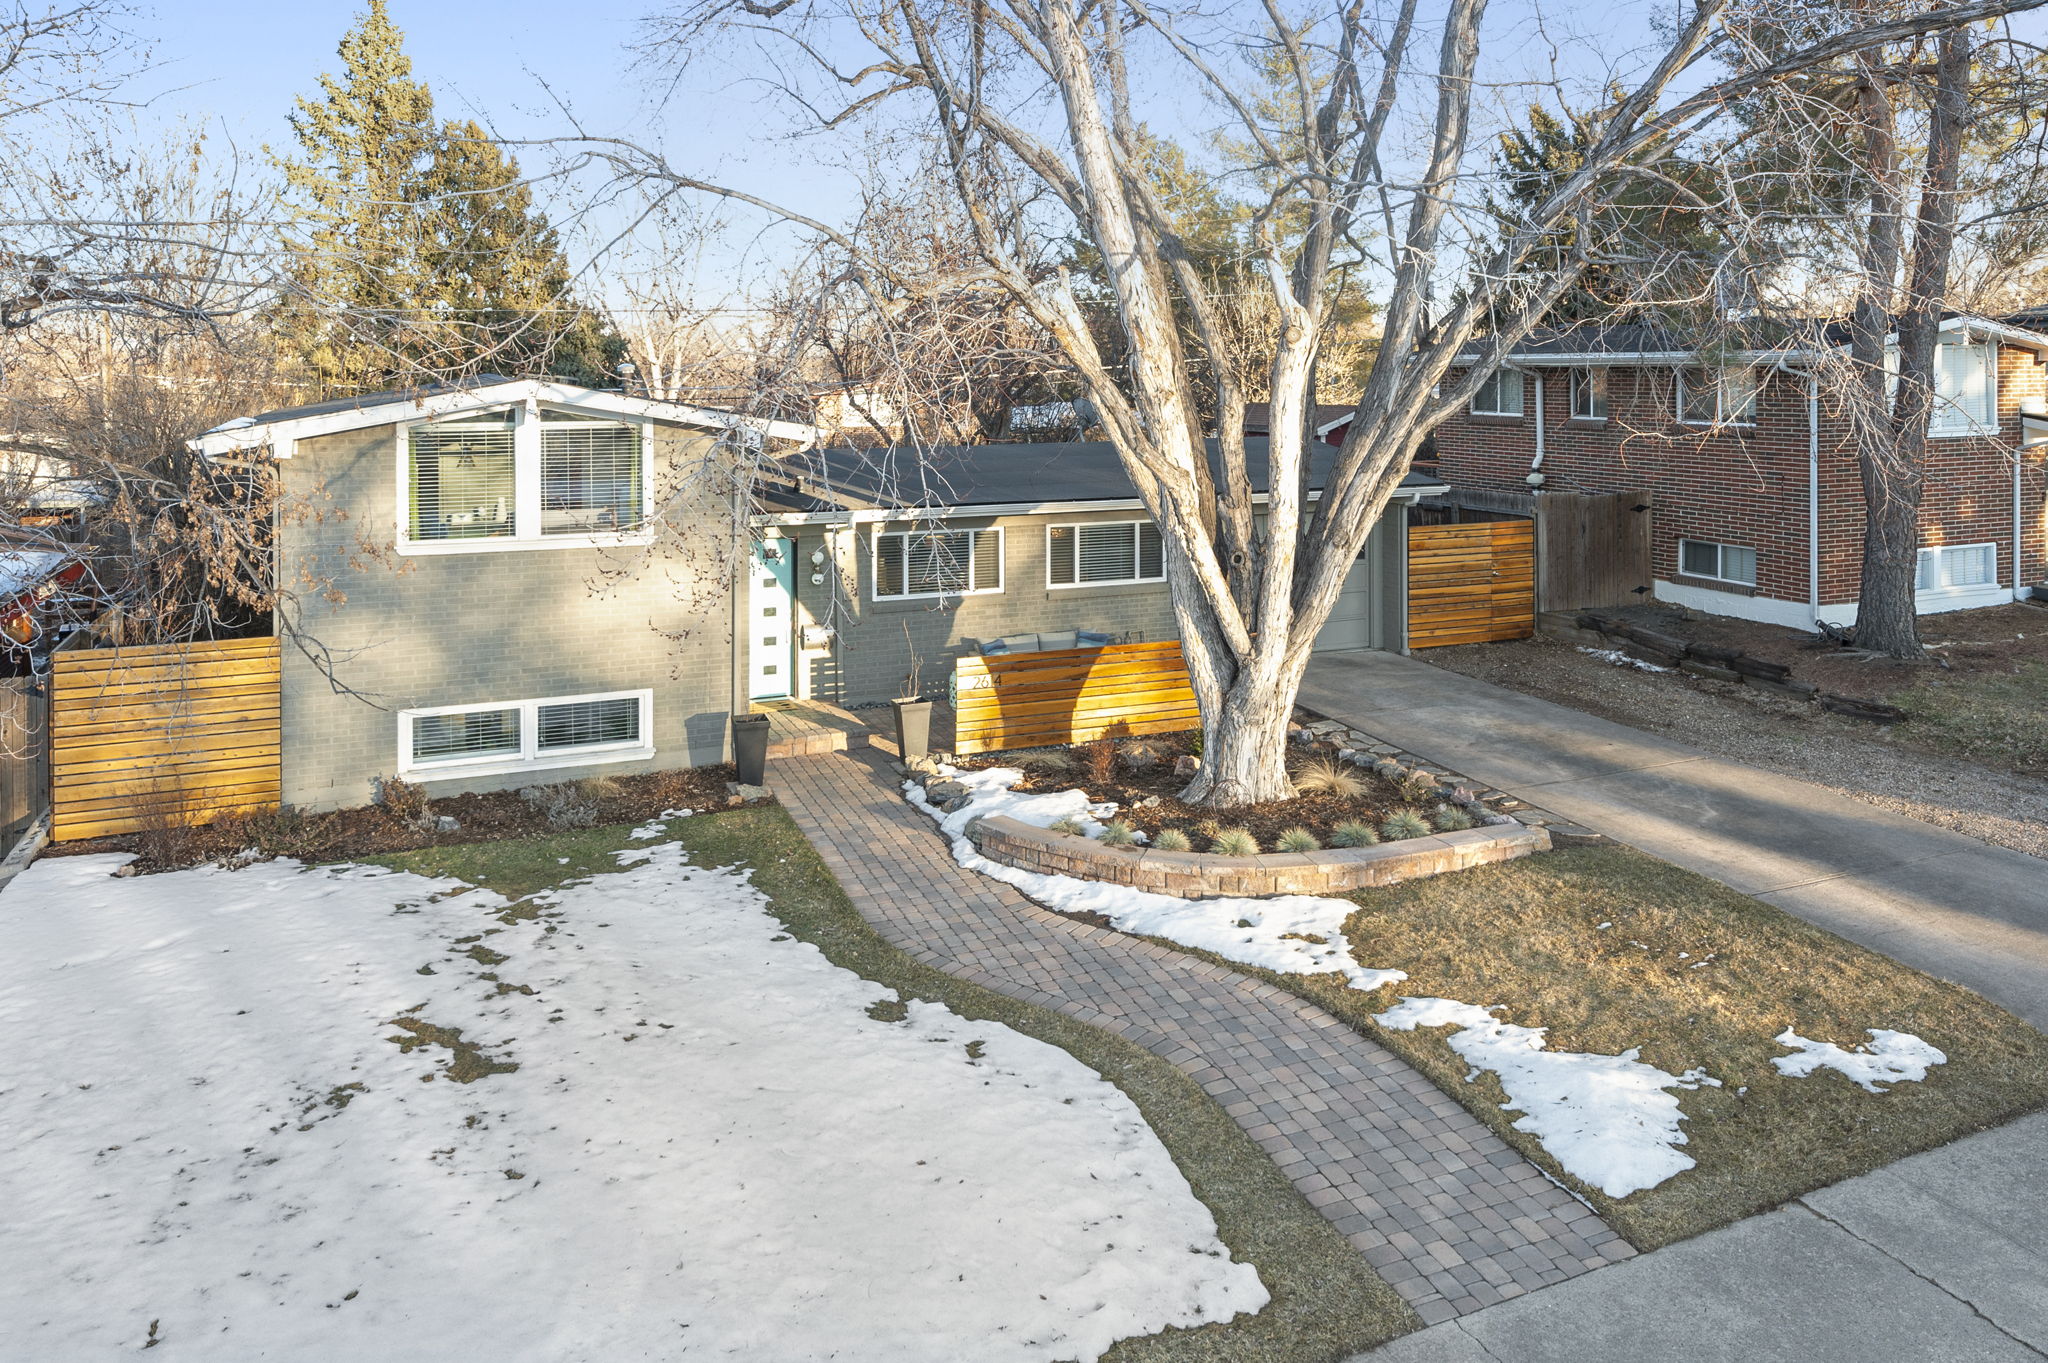  2614 S Raleigh St, Denver, CO 80219, US Photo 44